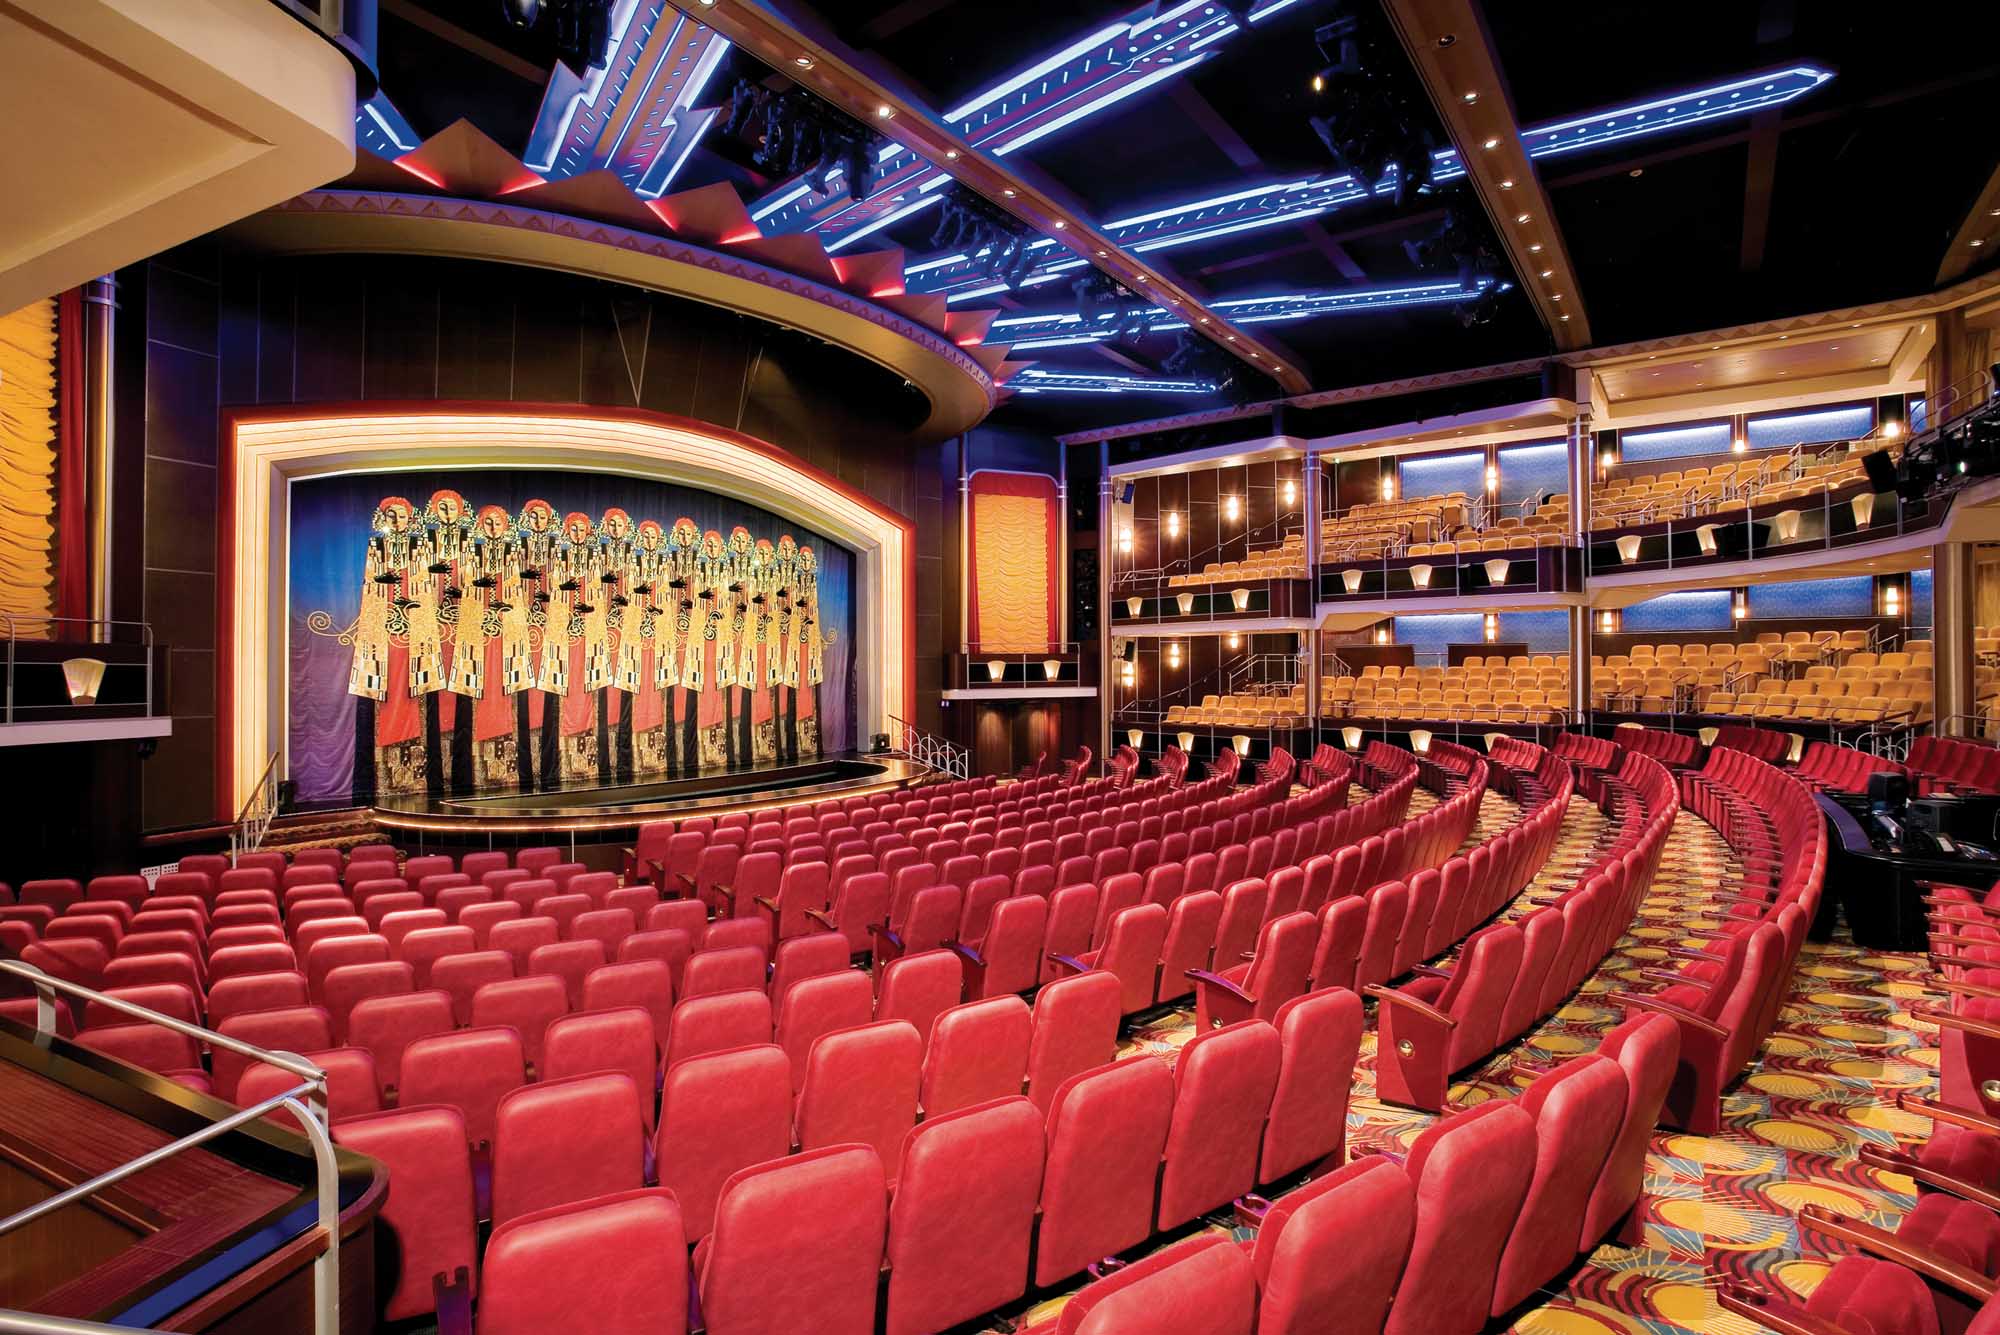 Freedom of the Seas' multi-level Arcadia Theater features contemporary musical productions, drama, cabaret and other nightly entertainment.